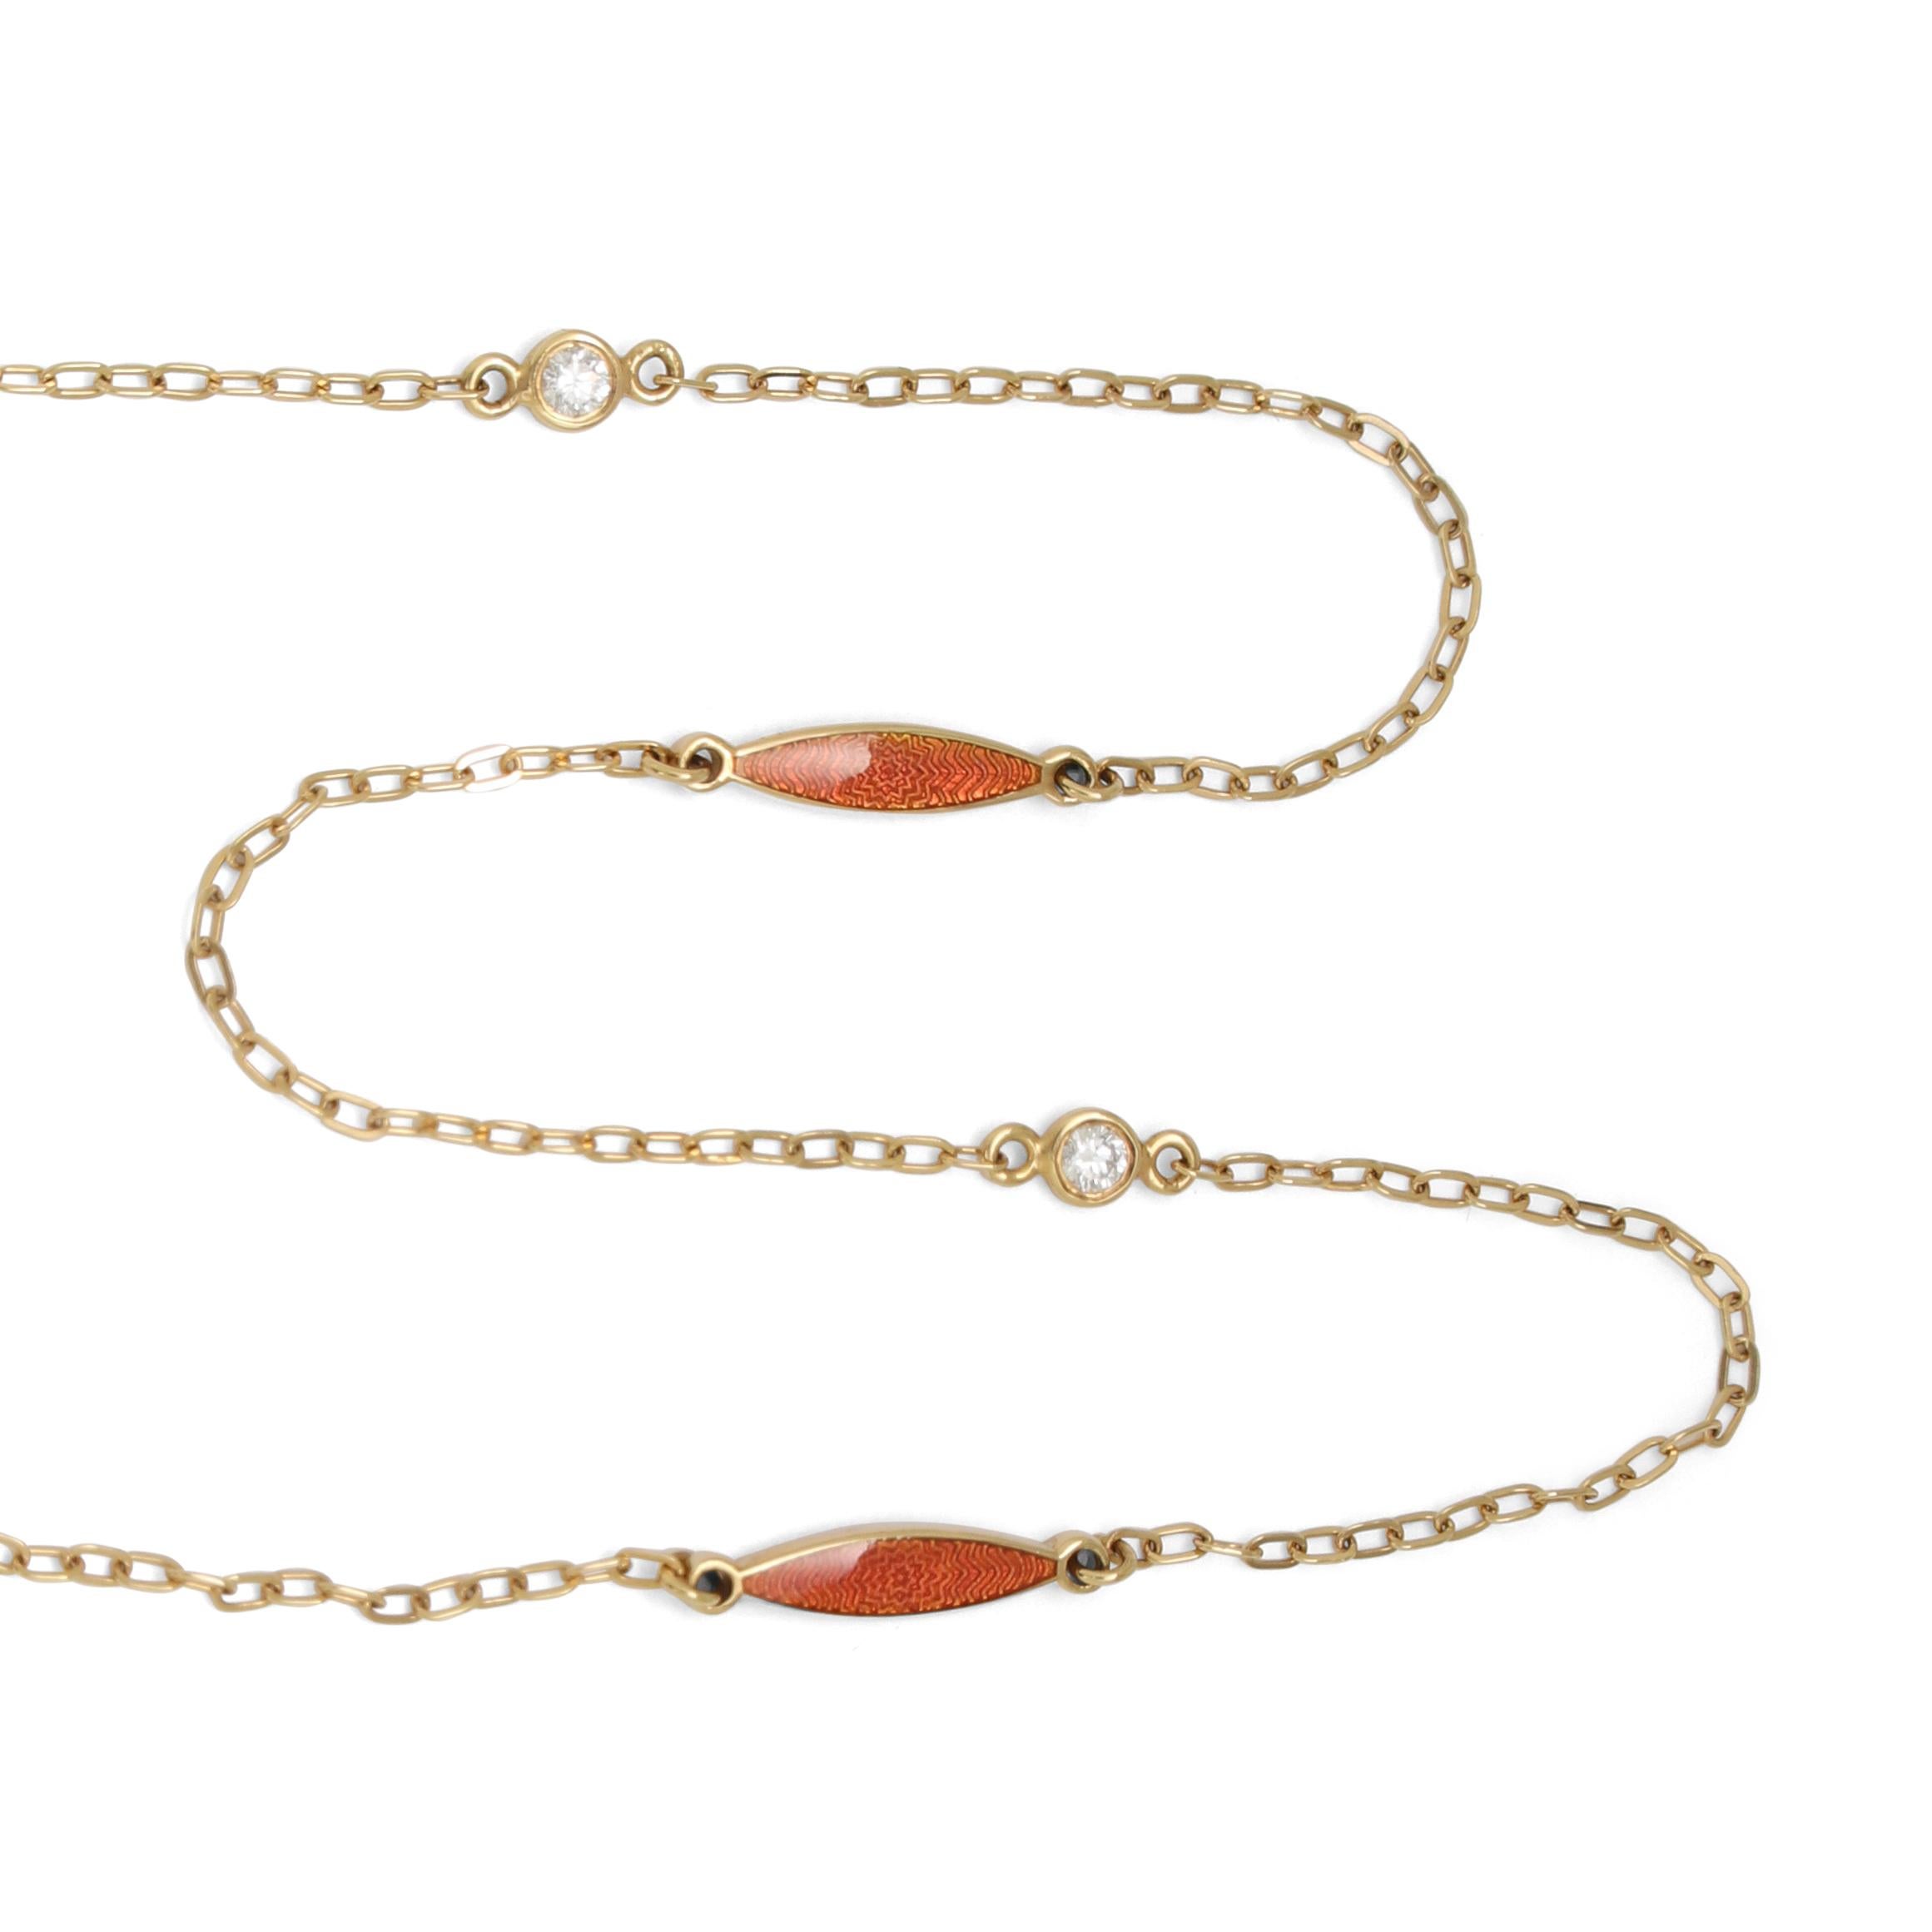 Victor Mayer Necklace, 18k yellow gold, translucent light red vitreous enamel, 2 diamonds, total 0.10 ct, G VS, 46.0 cm

About the creator Victor Mayer
Victor Mayer is internationally renowned for elegant timeless designs and unrivalled expertise in